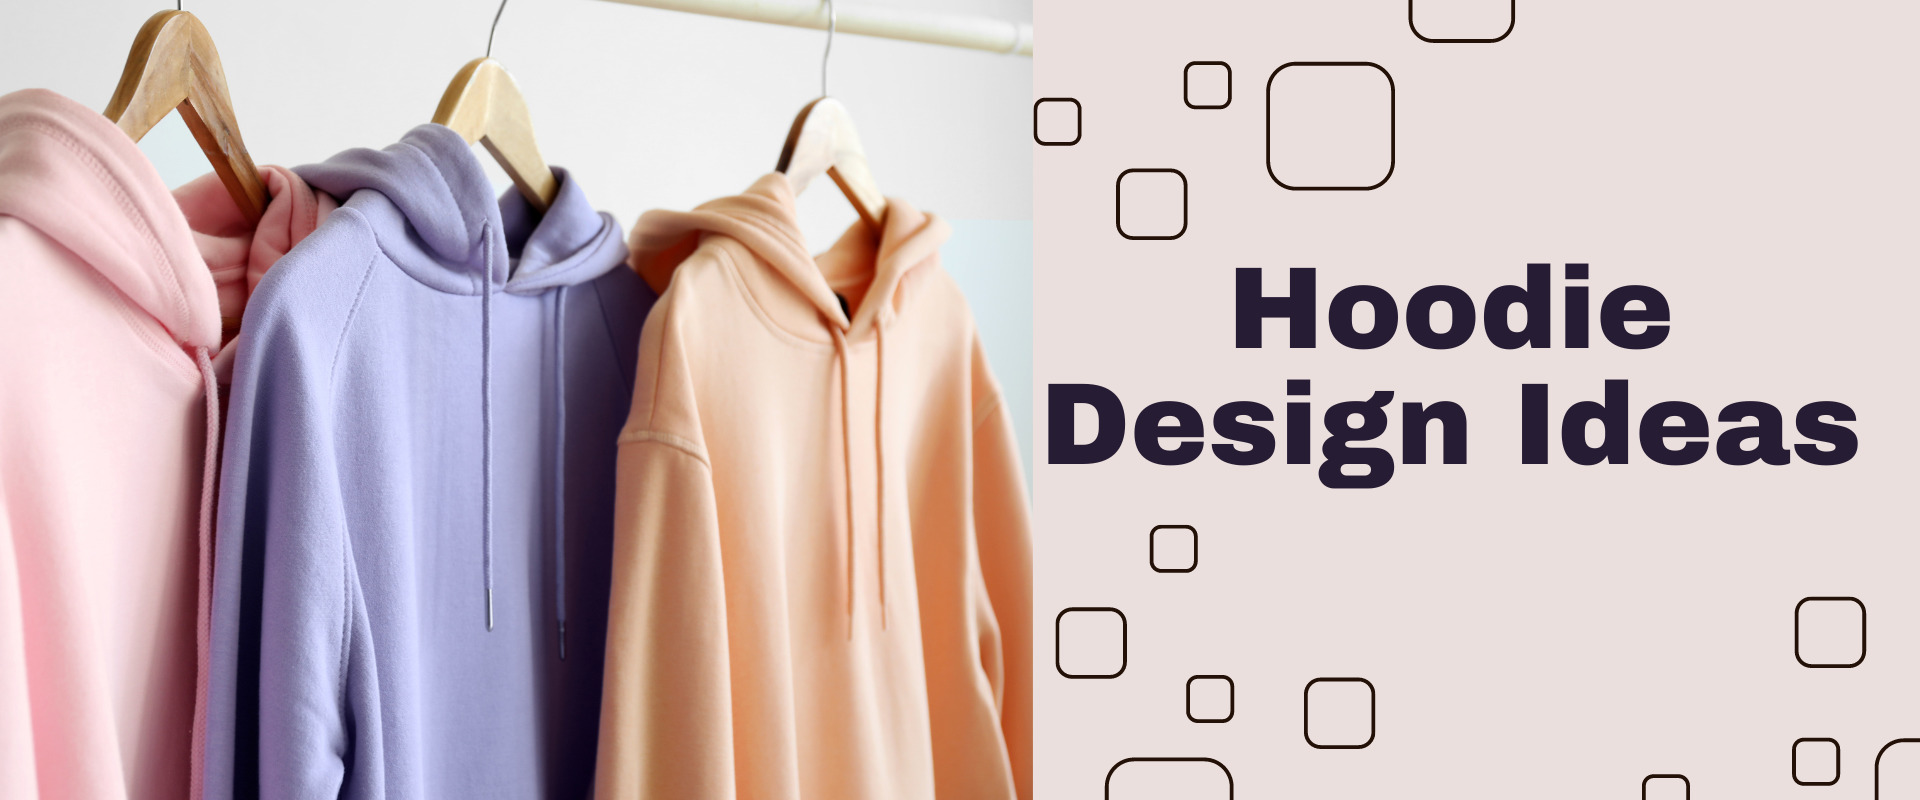 35+ Amazing Custom Hoodie Design Ideas to Stay Ahead of the Curve